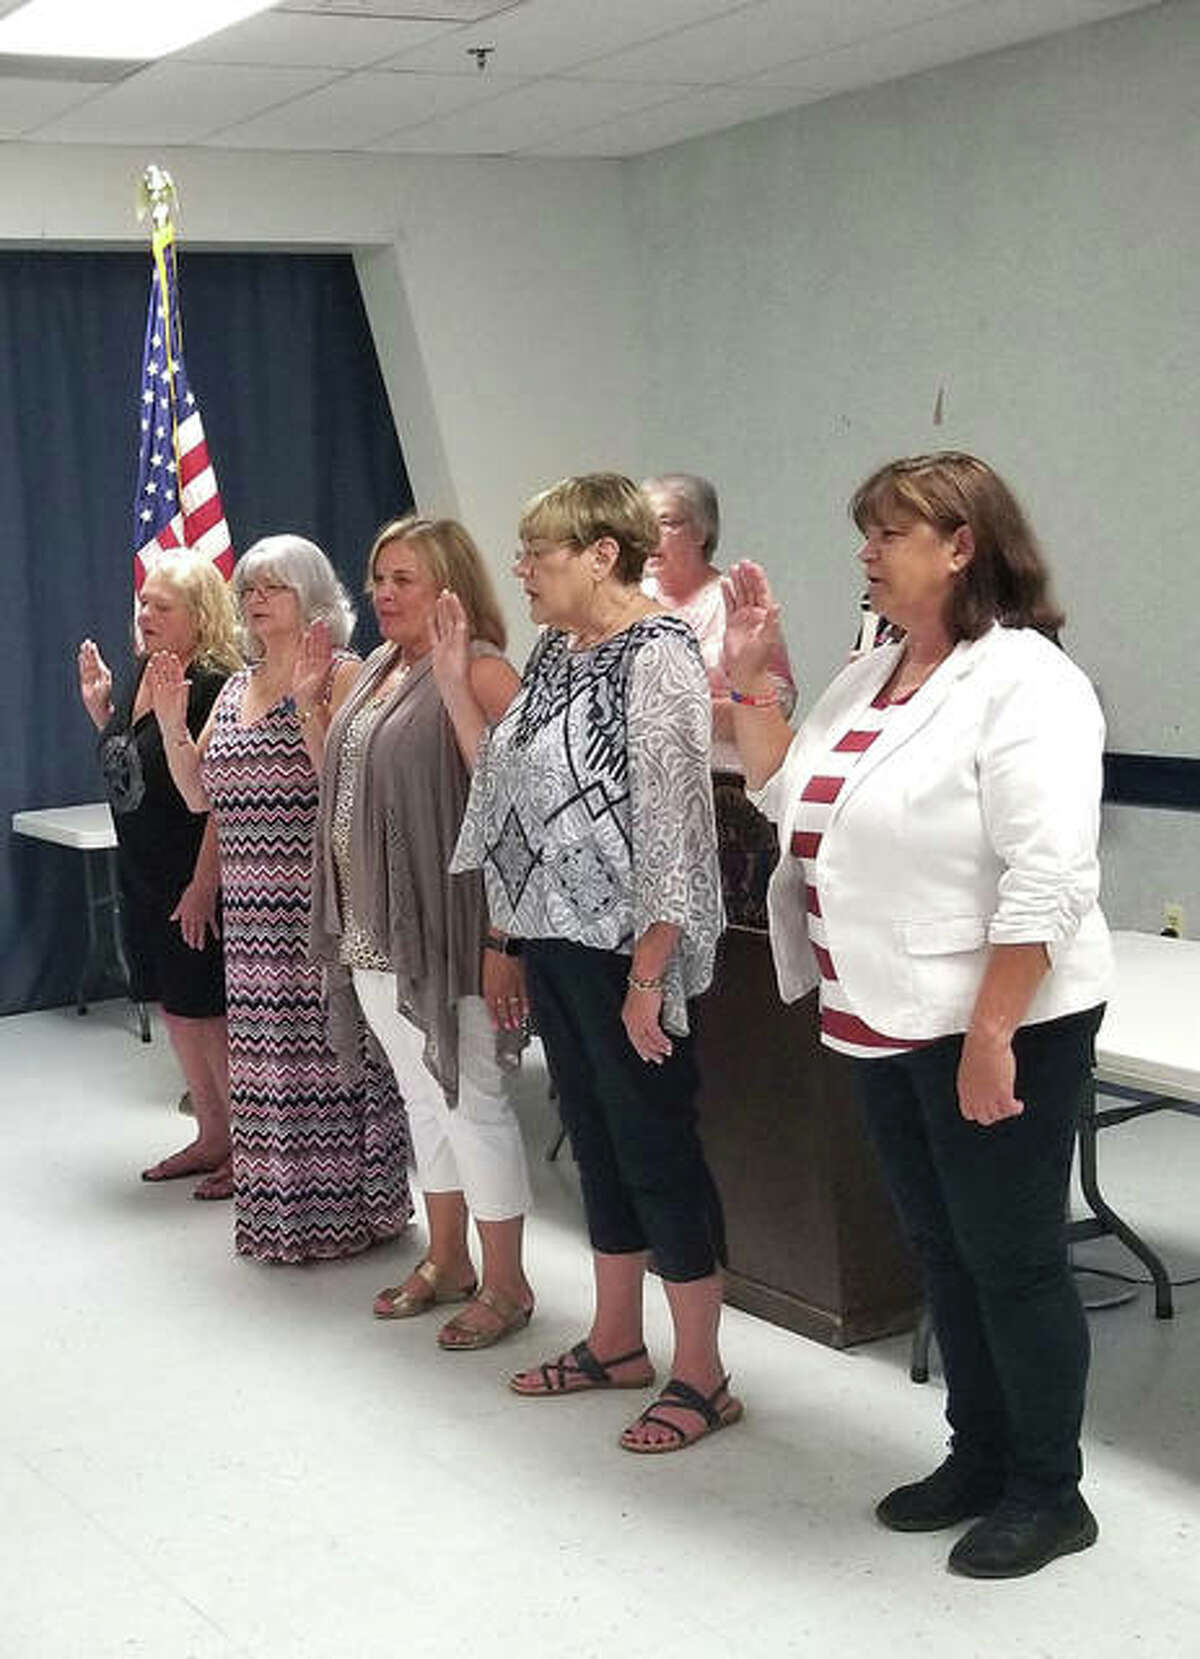 New officers for the Edwardsville American Legion Post #199 Auxiliary are sworn in during the installation ceremony on Sunday.